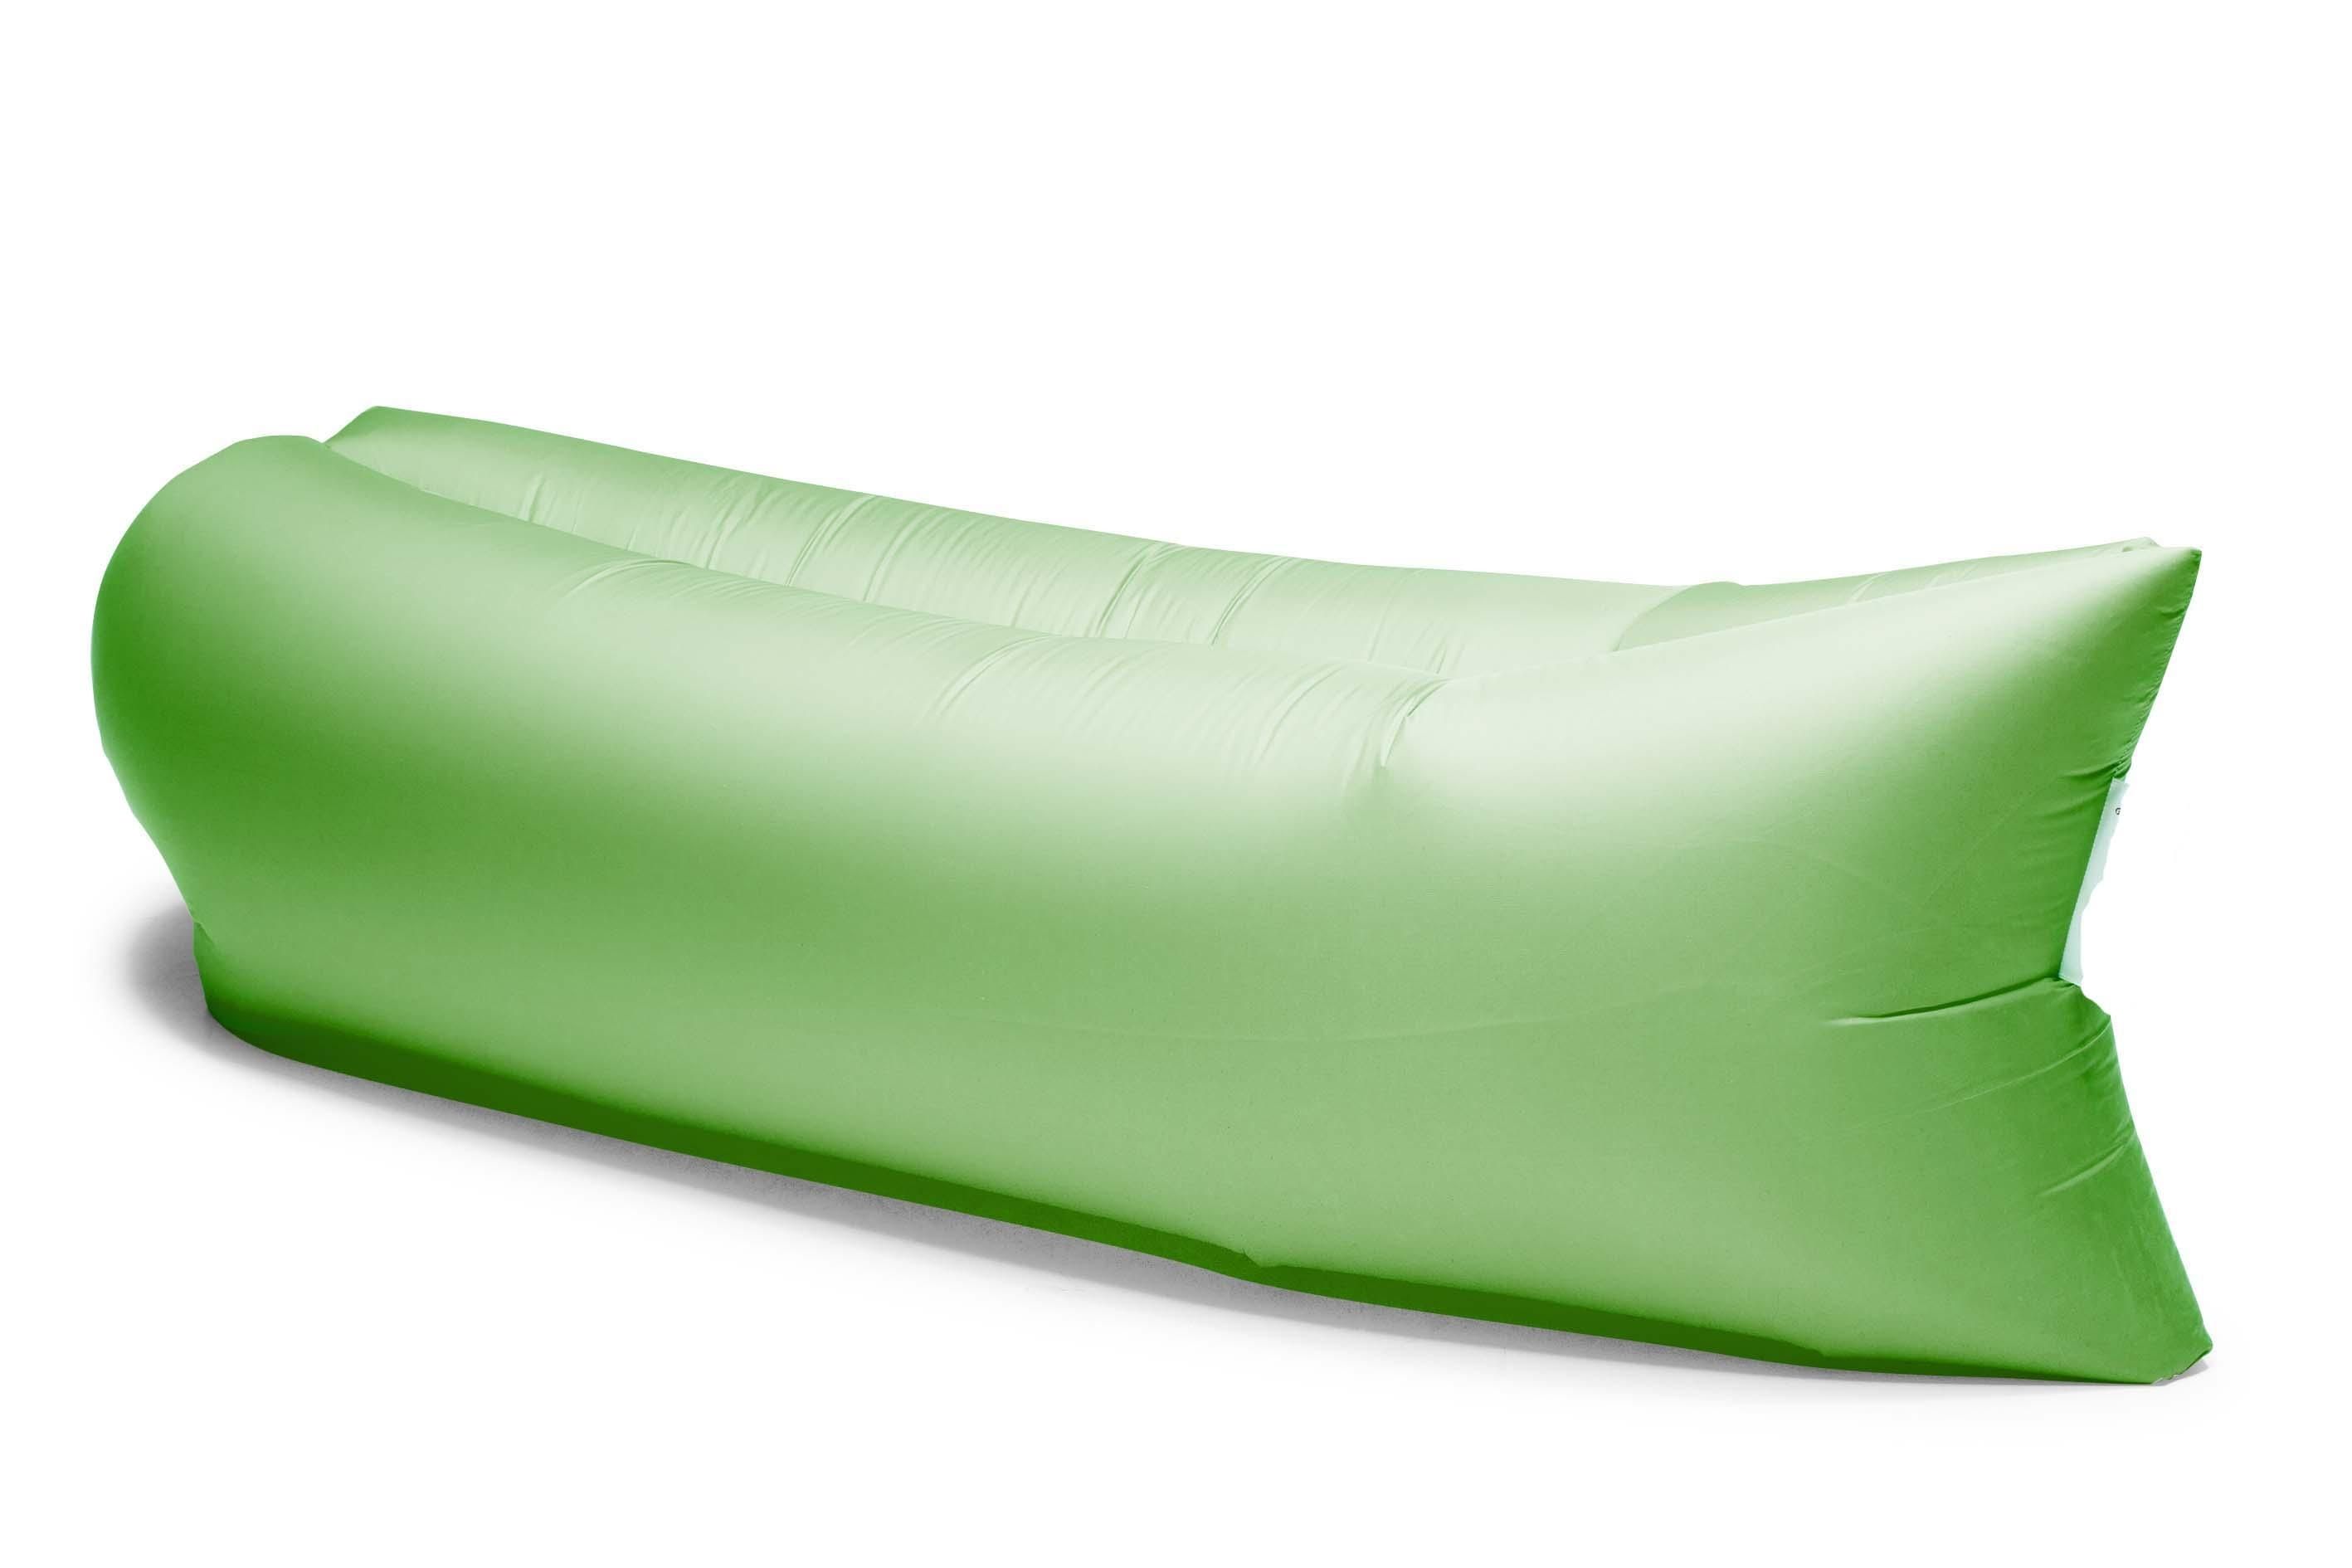 Sleeping Bag Sofa With Ideas Picture 11818 | Kengire Within Sleeping Bag Sofas (View 20 of 20)